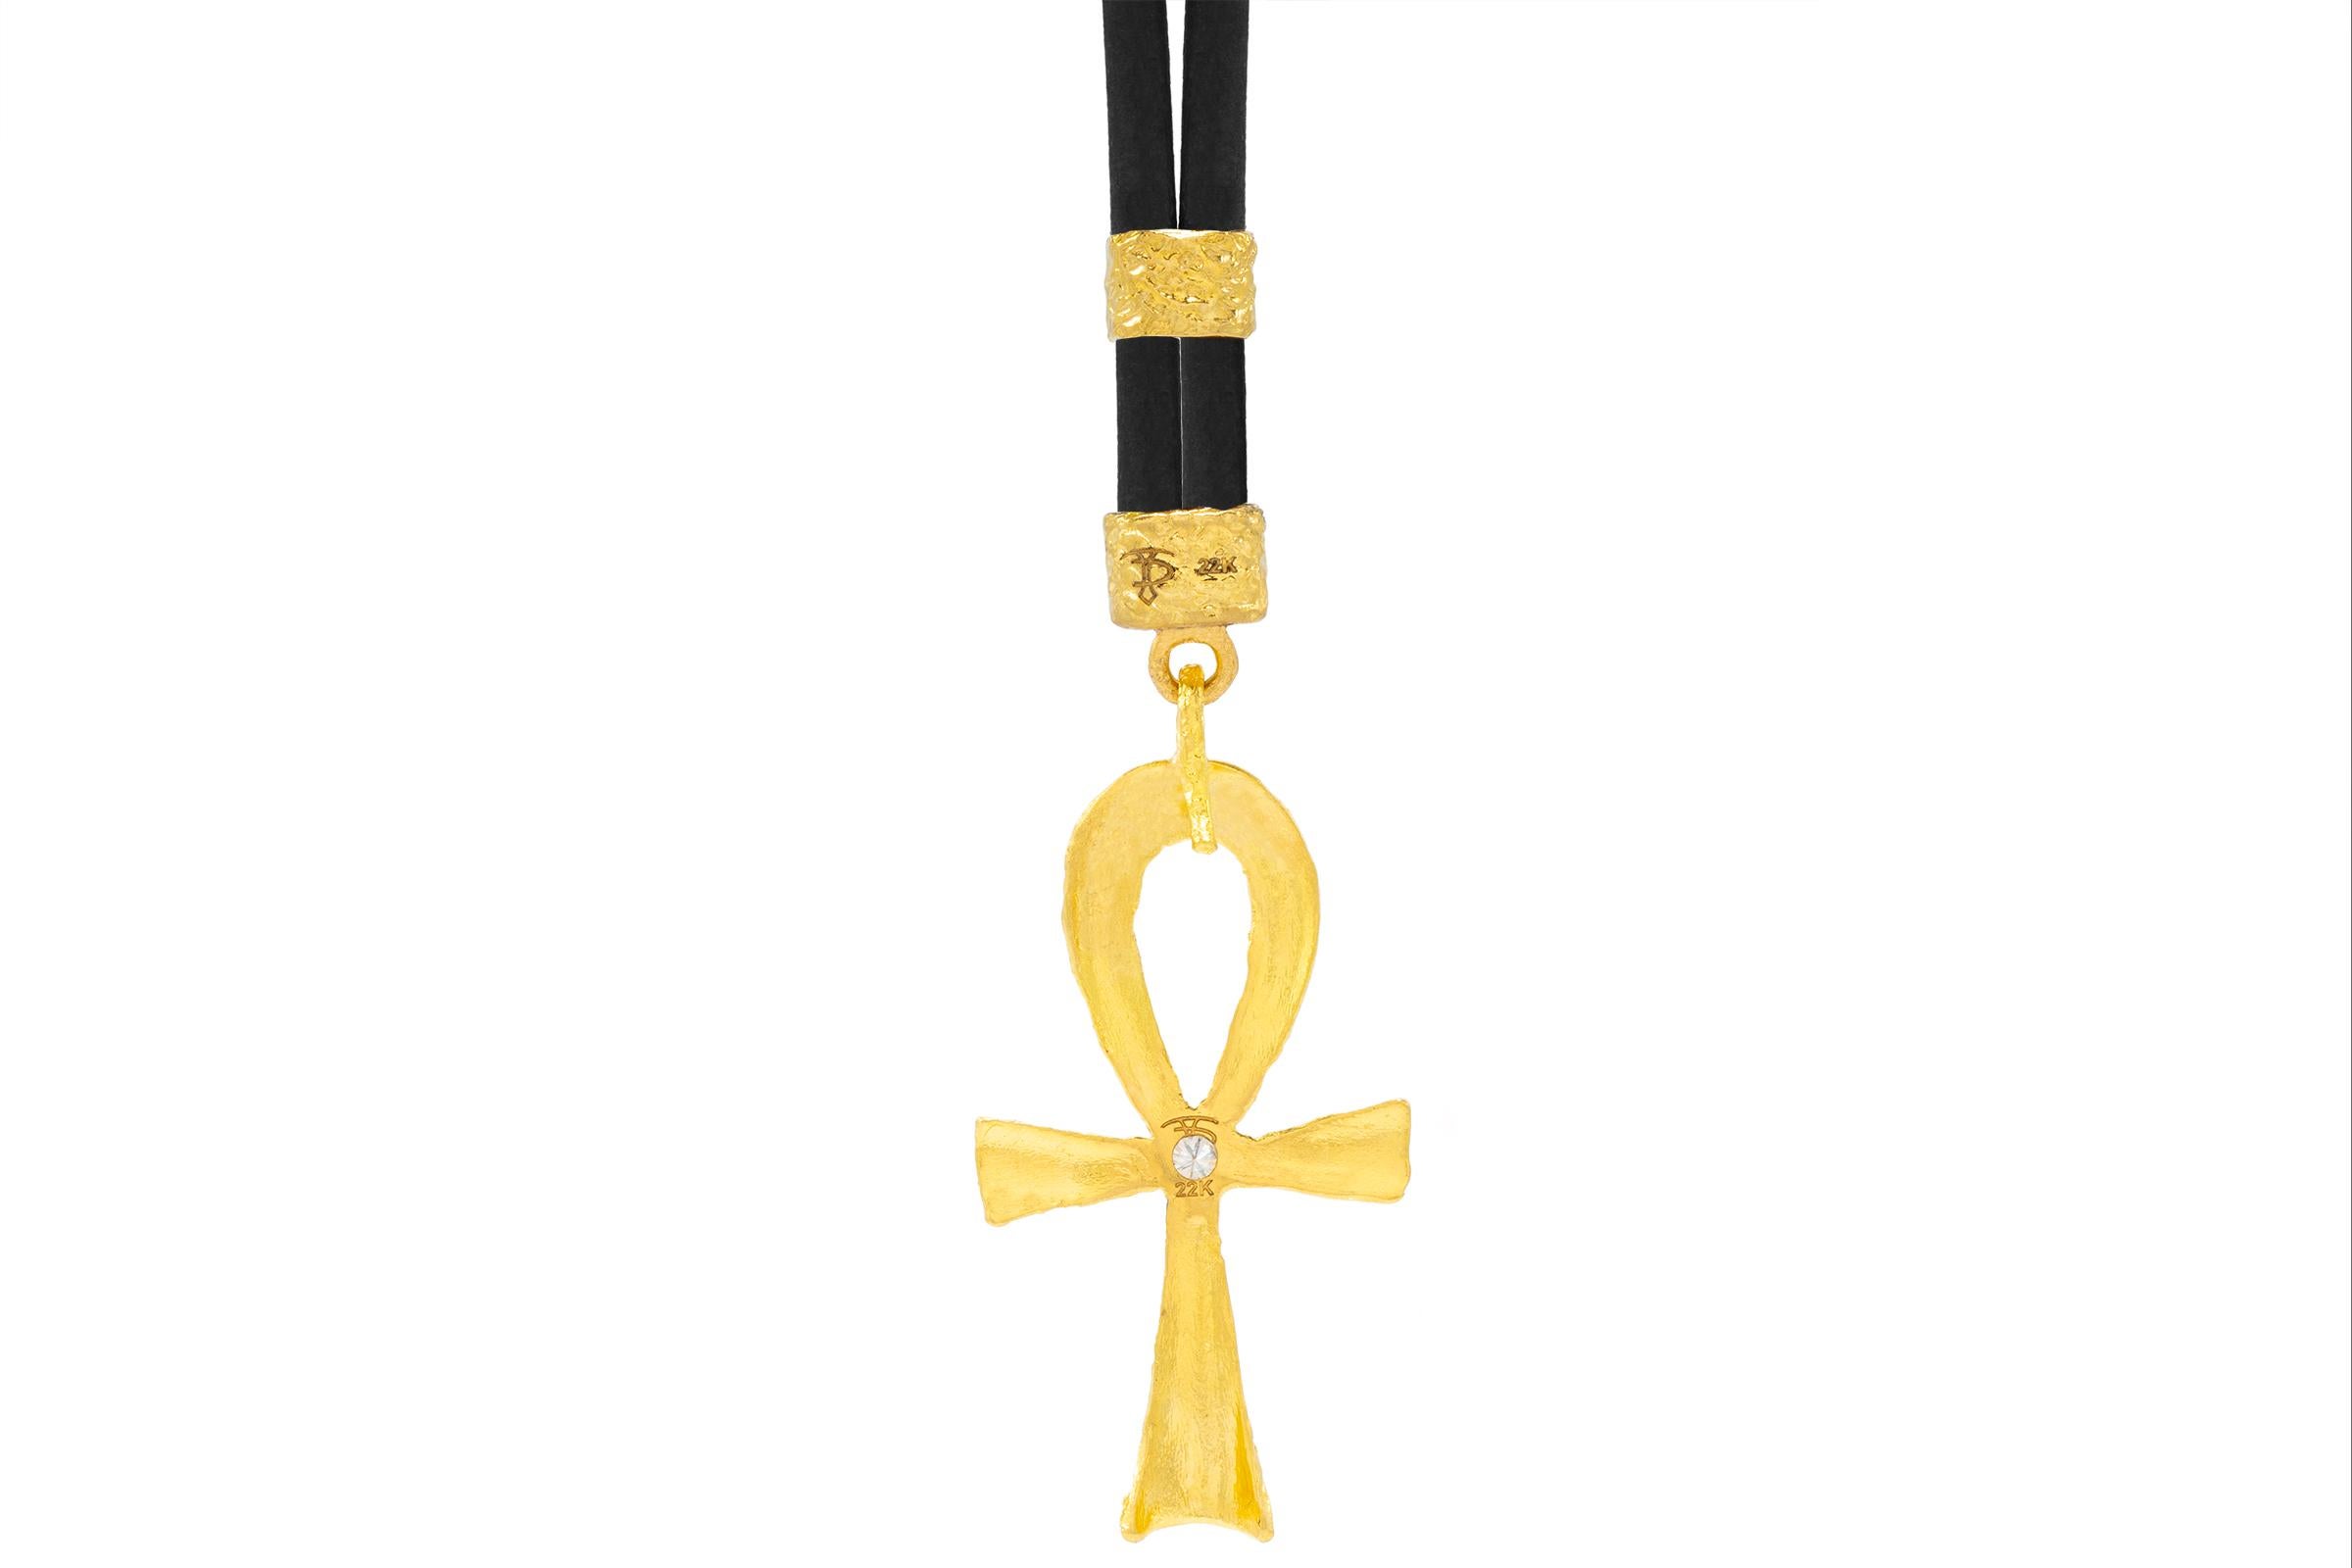 Allegra Ankh Pendant in 22k Gold, by Tagili In New Condition For Sale In New York, NY